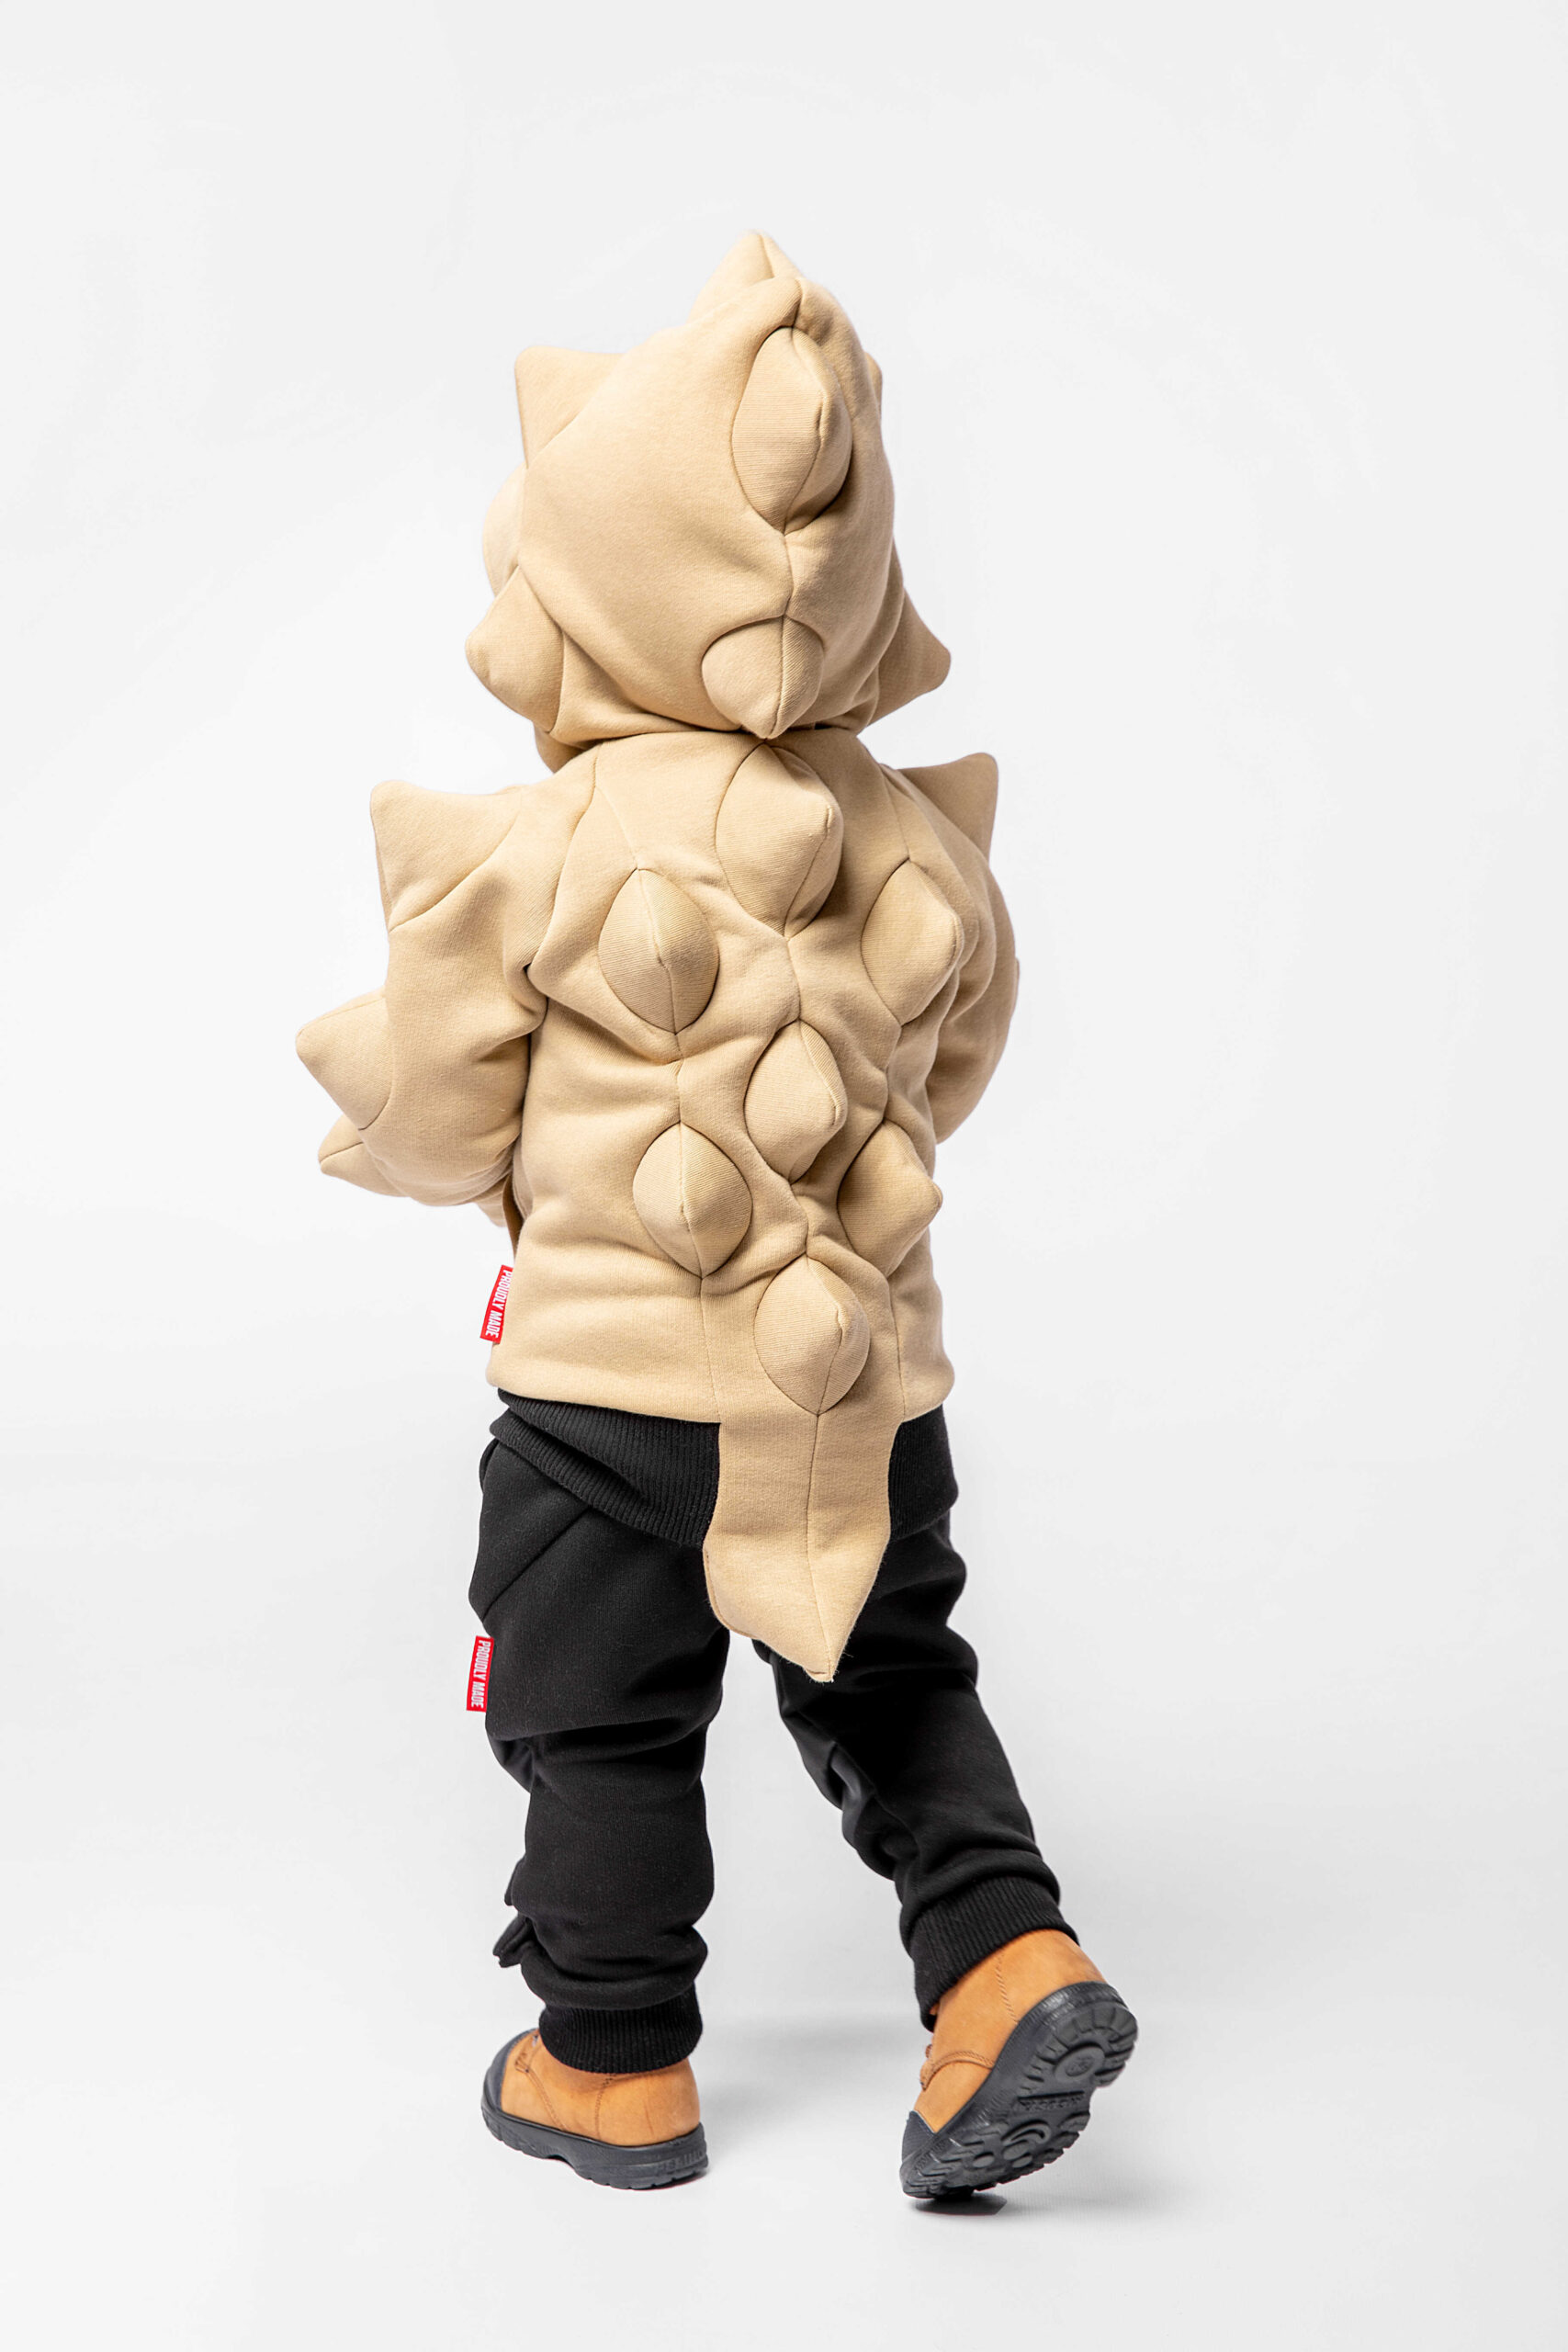 Kids Hoodie Stegosaurus. Color sand. 
Material of the hoodie – three-cord thread fabric: 77% cotton, 23% polyester.